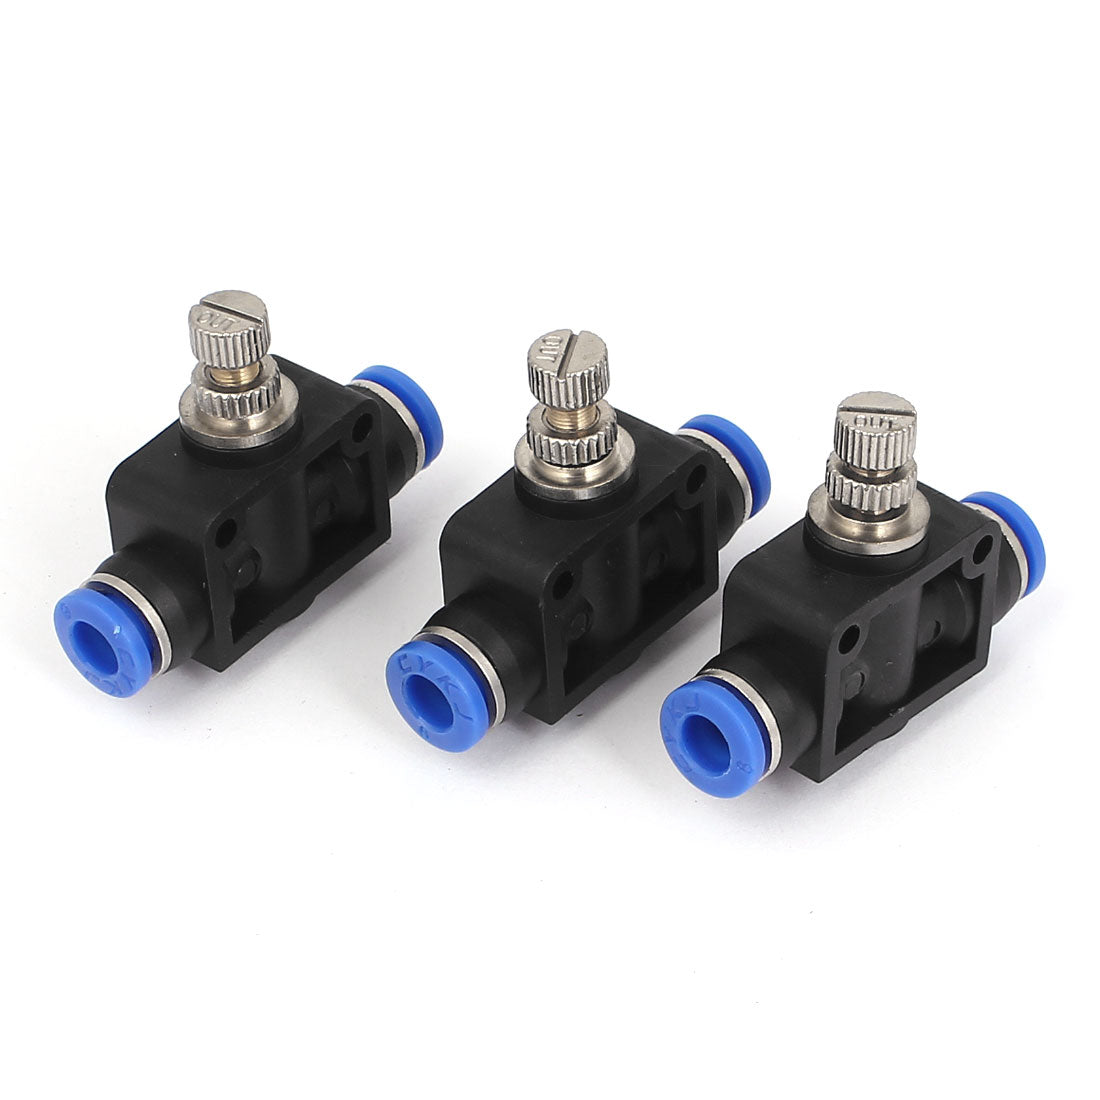 uxcell Uxcell 3pcs 6mm Tube Union Flow Speed Controllers Regulators Pneumatic Push in Fittings